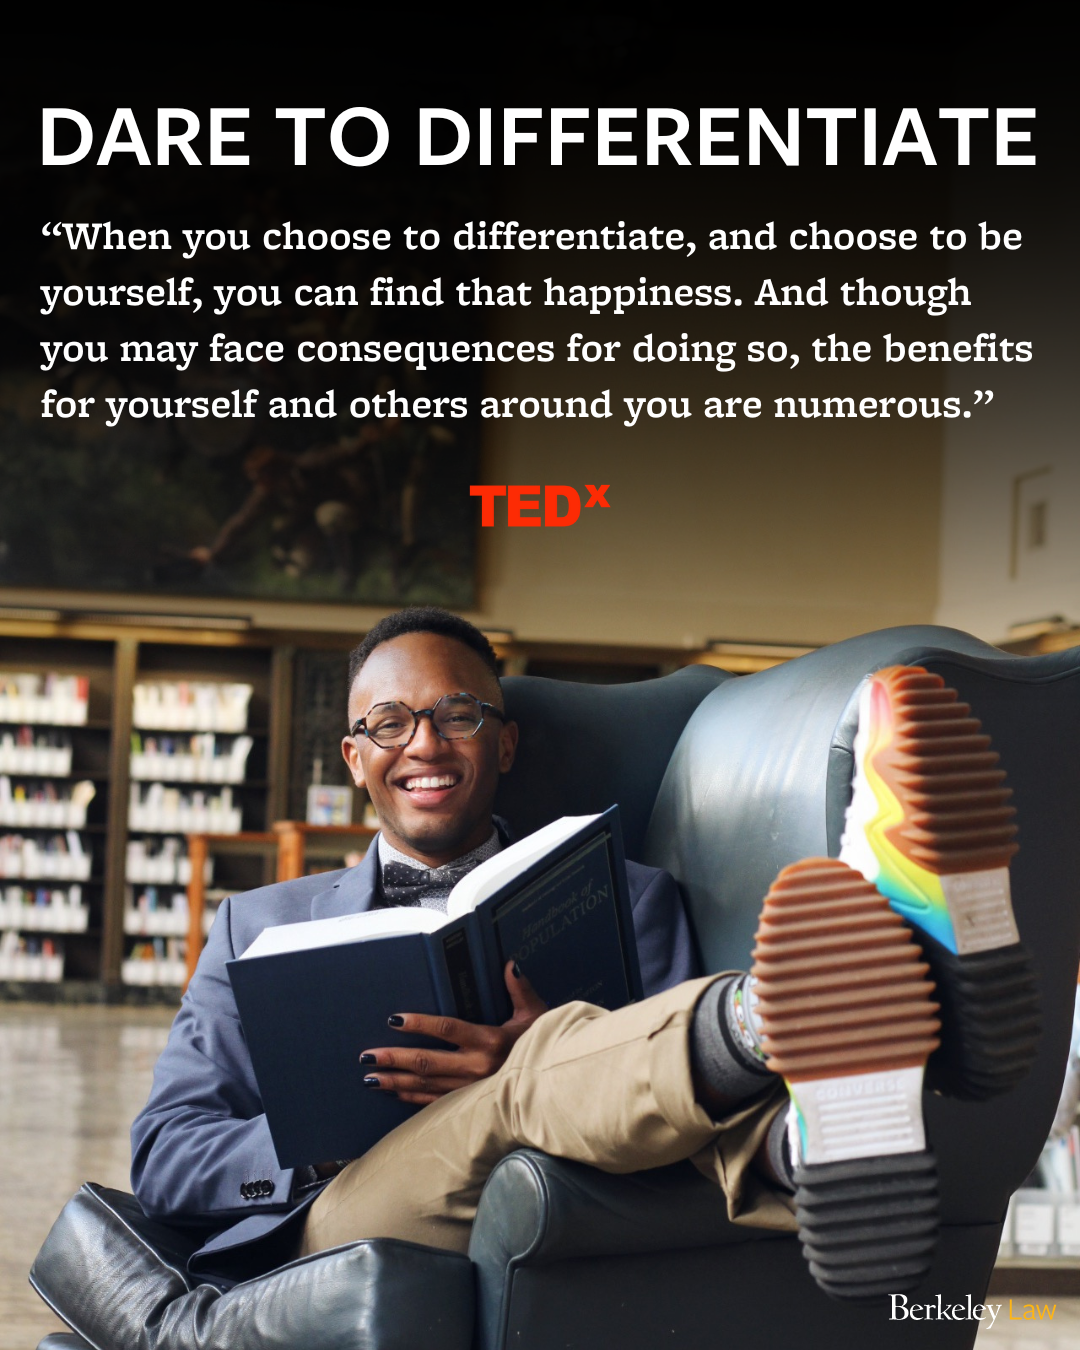 Clicking this photo will redirect you to an Instagram post of Kendrick's feature.
Kendrick smiling and sitting at the Doe Library with his legs on the arm rest and a book on his hands. Text overlaid says: "DARE TO DIFFERENTIATE
"When you choose to differentiate, and choose to be yourself, you can find that happiness. And though you may face consequences for doing so, the benefits for yourself and others around you are numerous." A logo of Tedx is placed on the bottom of the text.